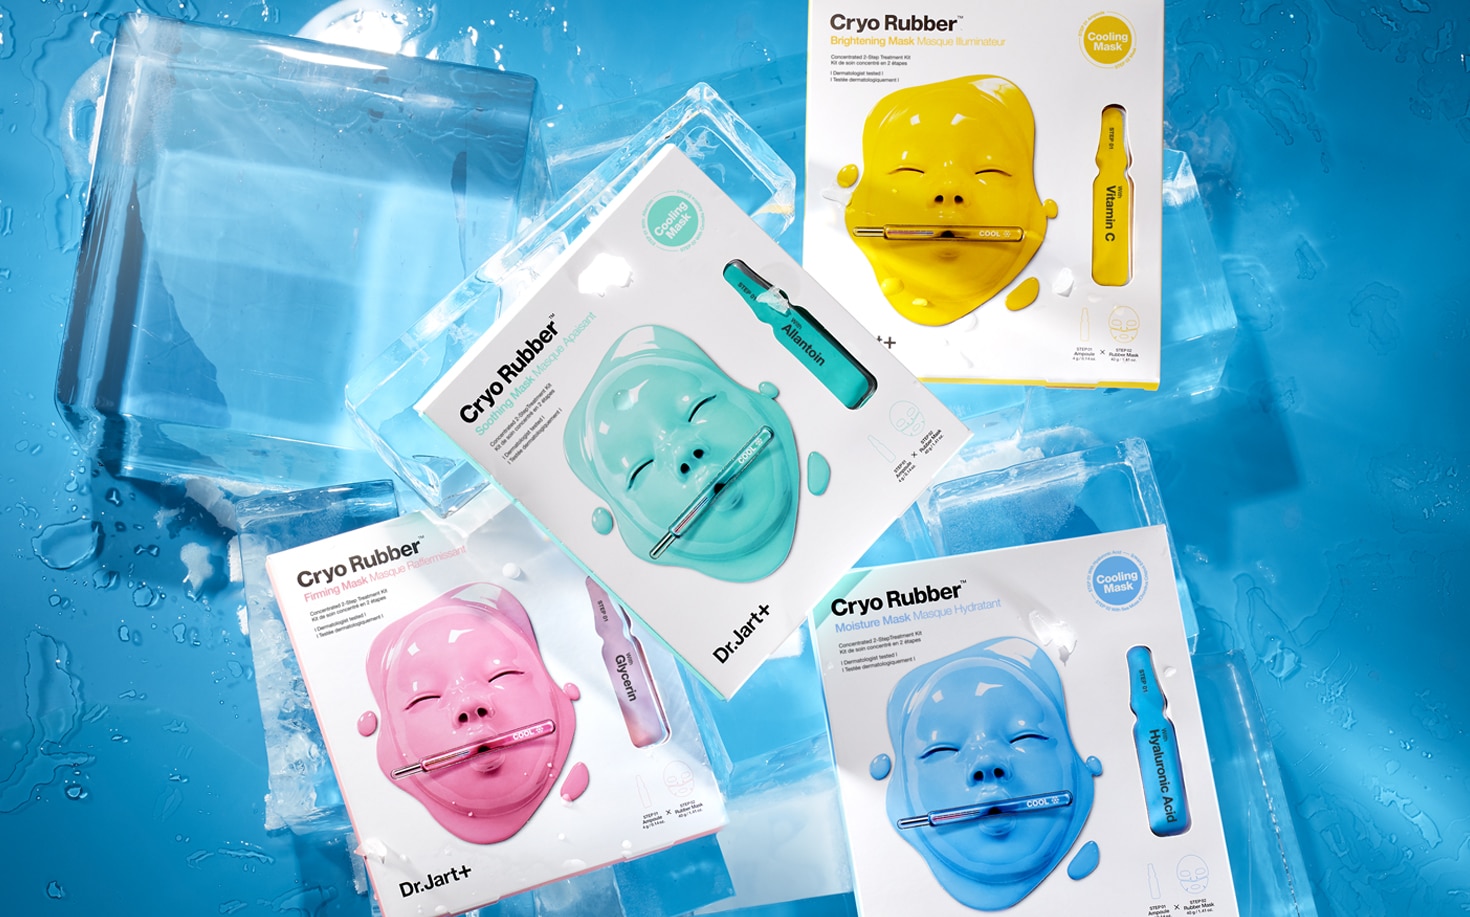 Cryo Rubber Mask packages are stacked on ice cubes